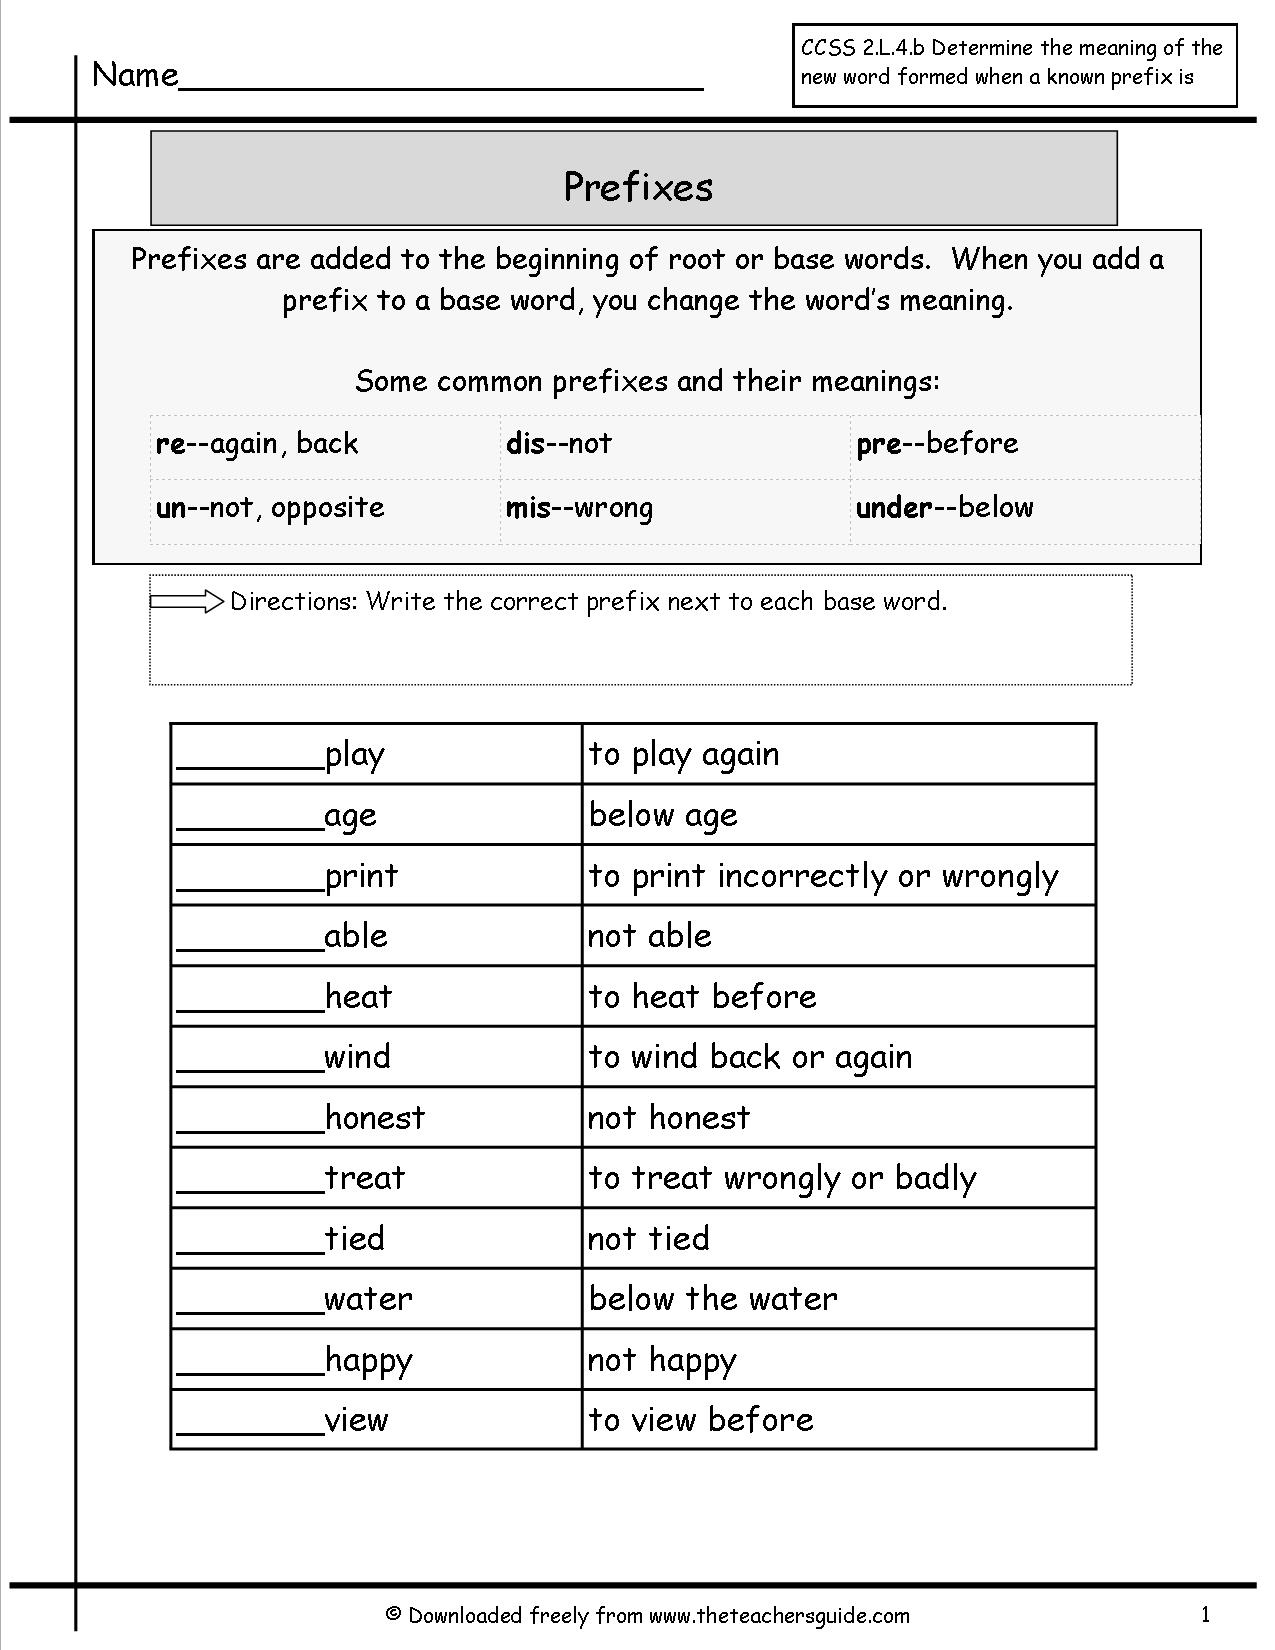 Free Prefixes And Suffixes Worksheets From The Teacher&amp;#039;s Guide